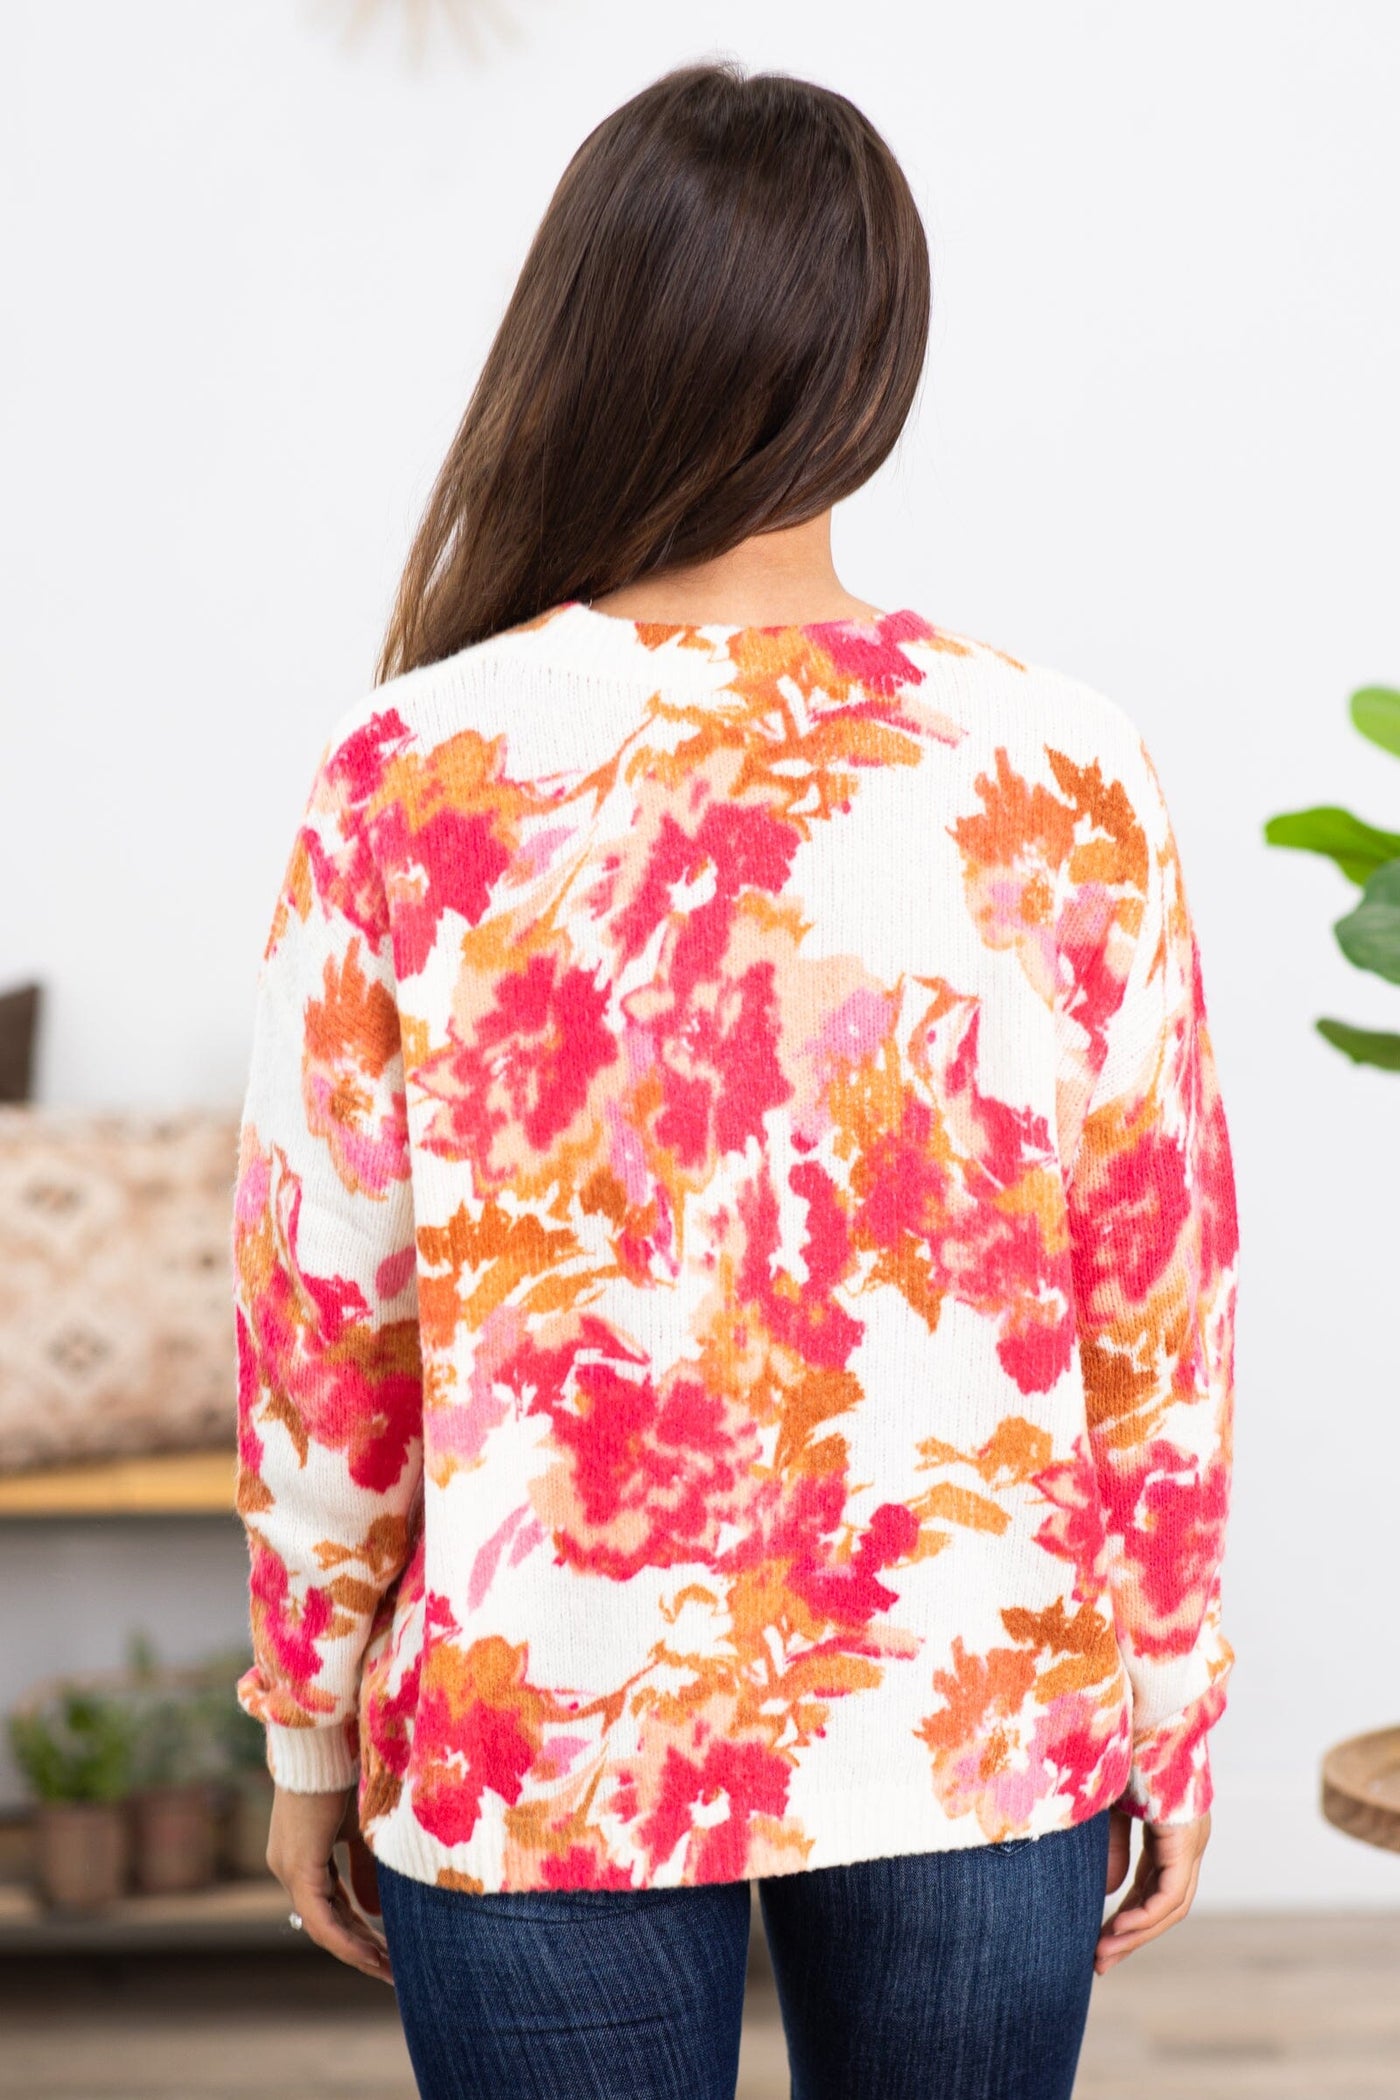 Ivory and Hot Pink Floral Print Sweater - Filly Flair